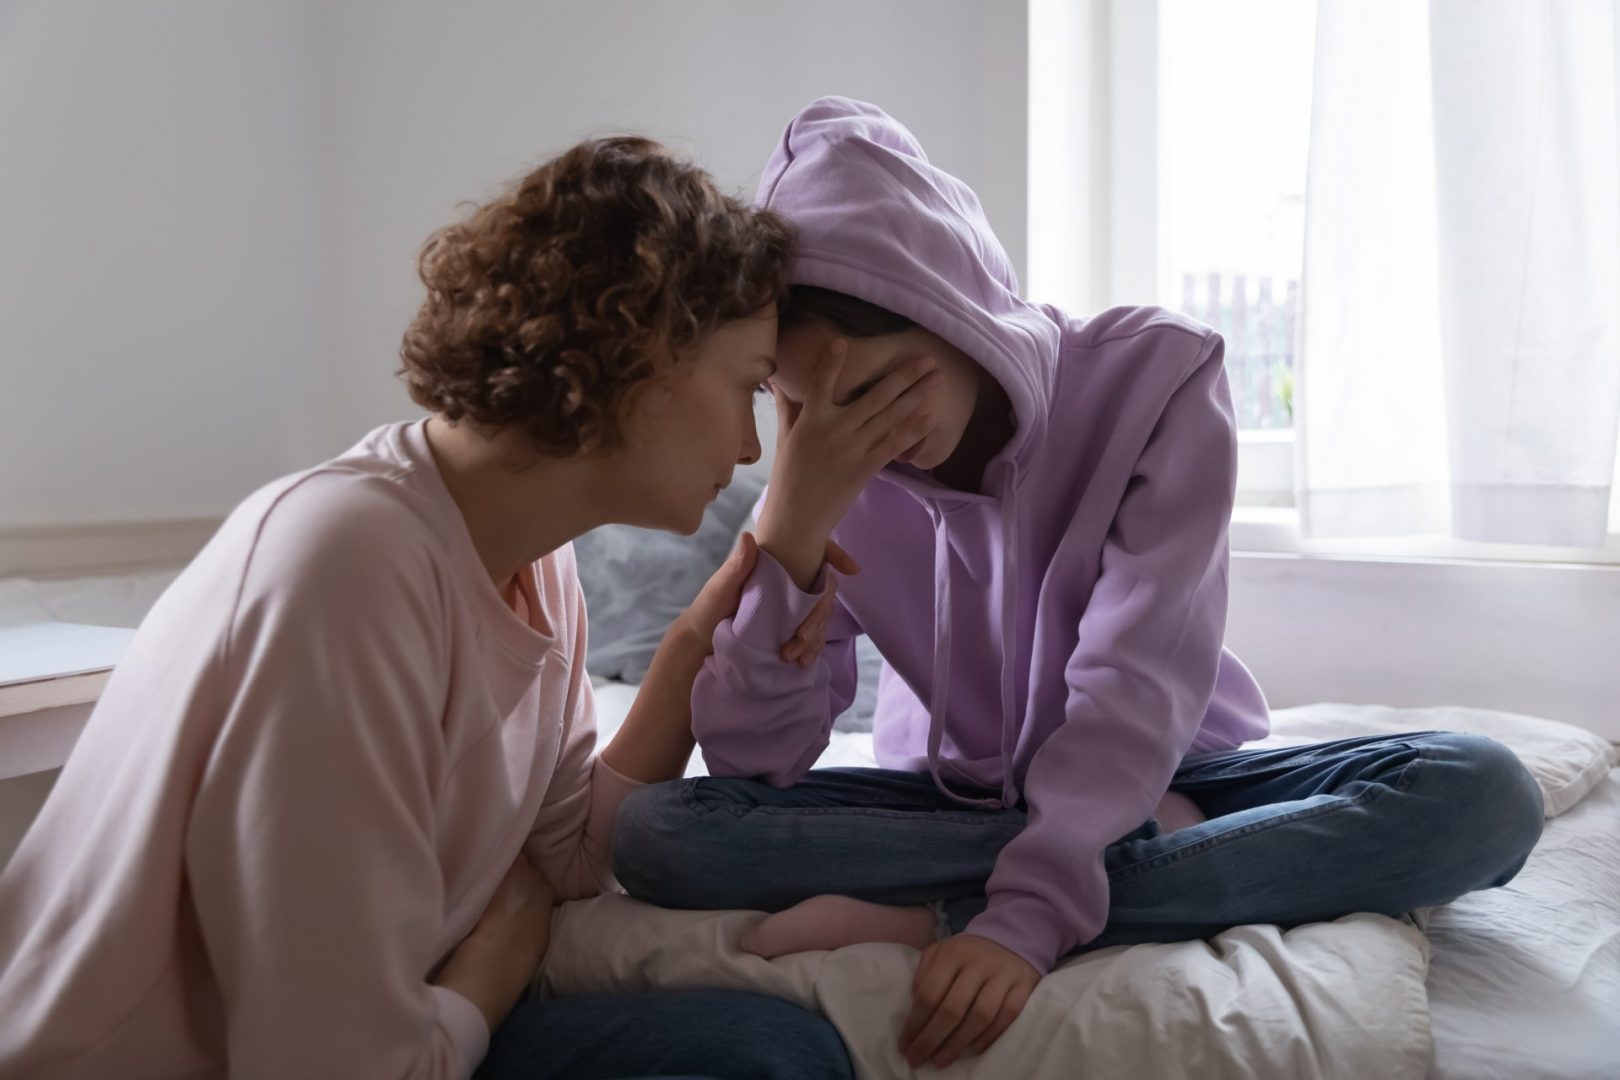 Depressed teenager being comforted by mother